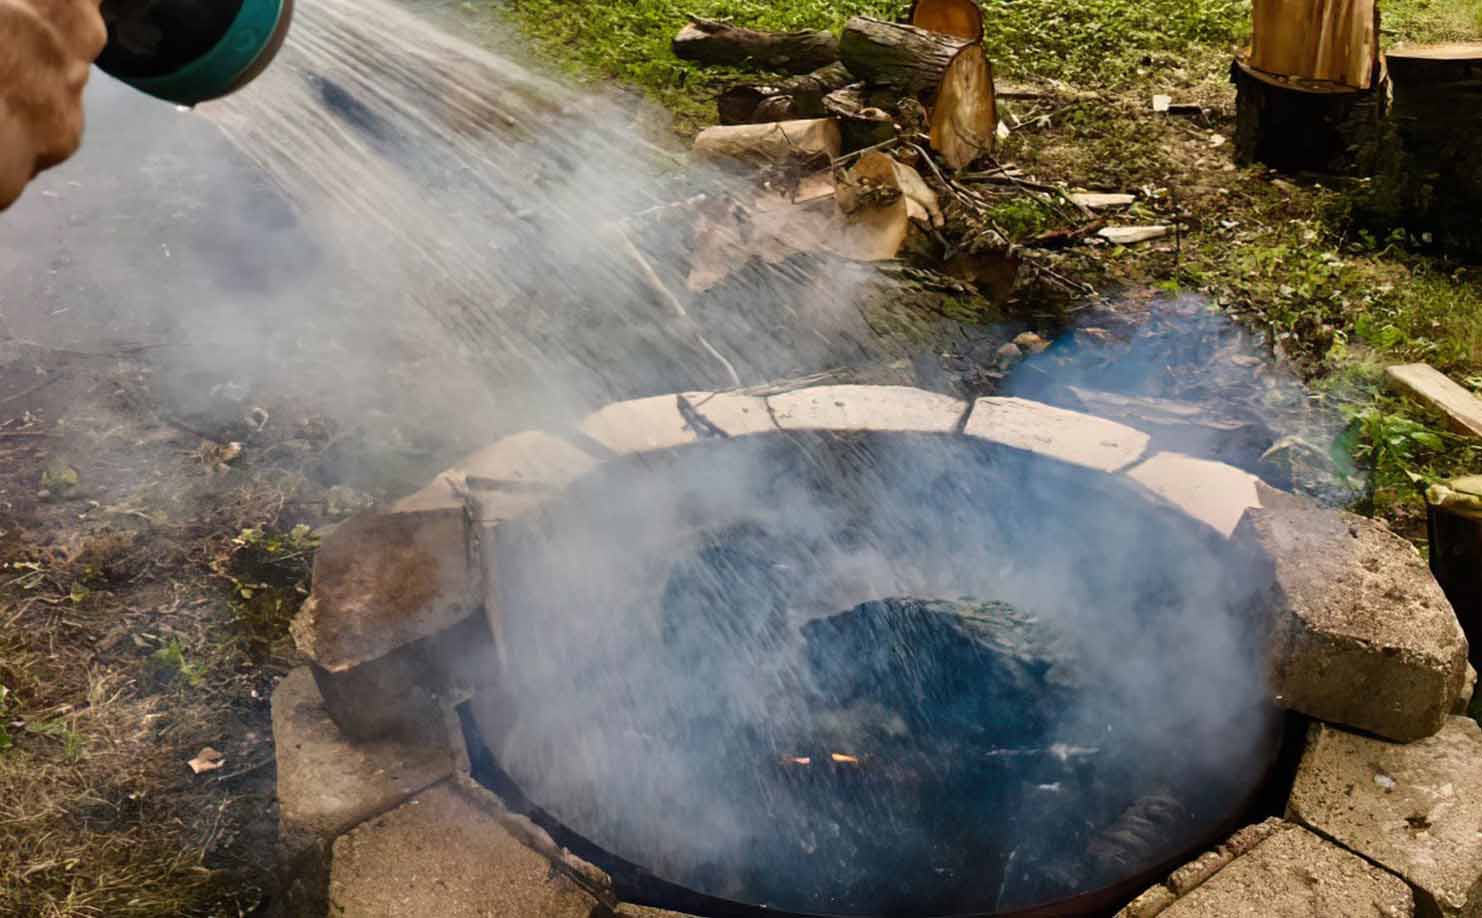 How to Put Out a Fire Pit 2022